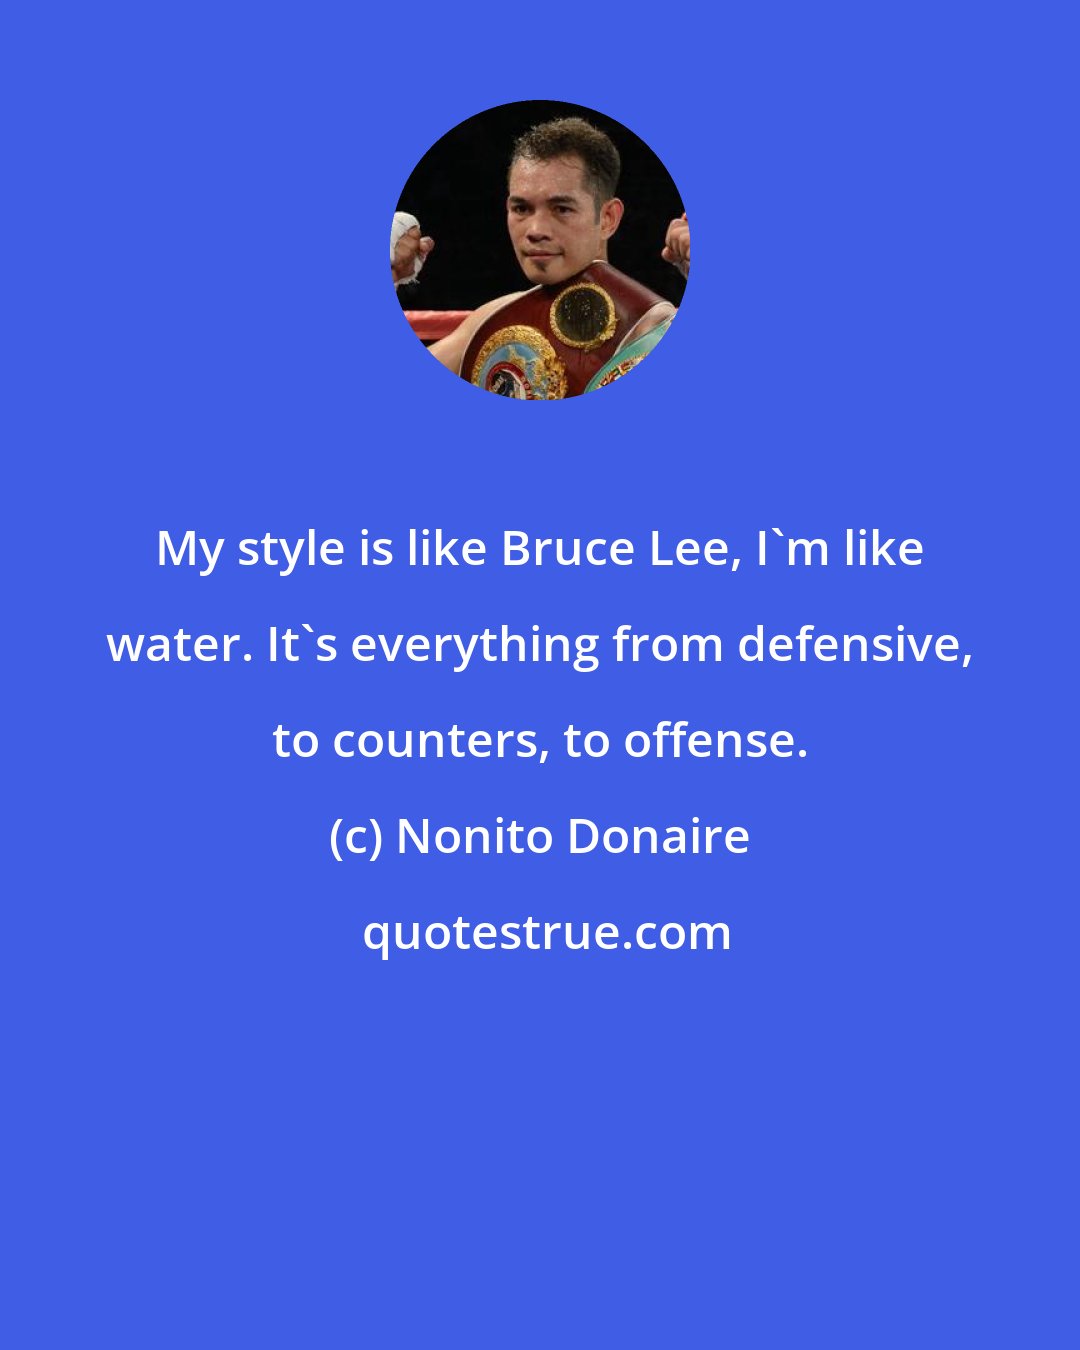 Nonito Donaire: My style is like Bruce Lee, I'm like water. It's everything from defensive, to counters, to offense.